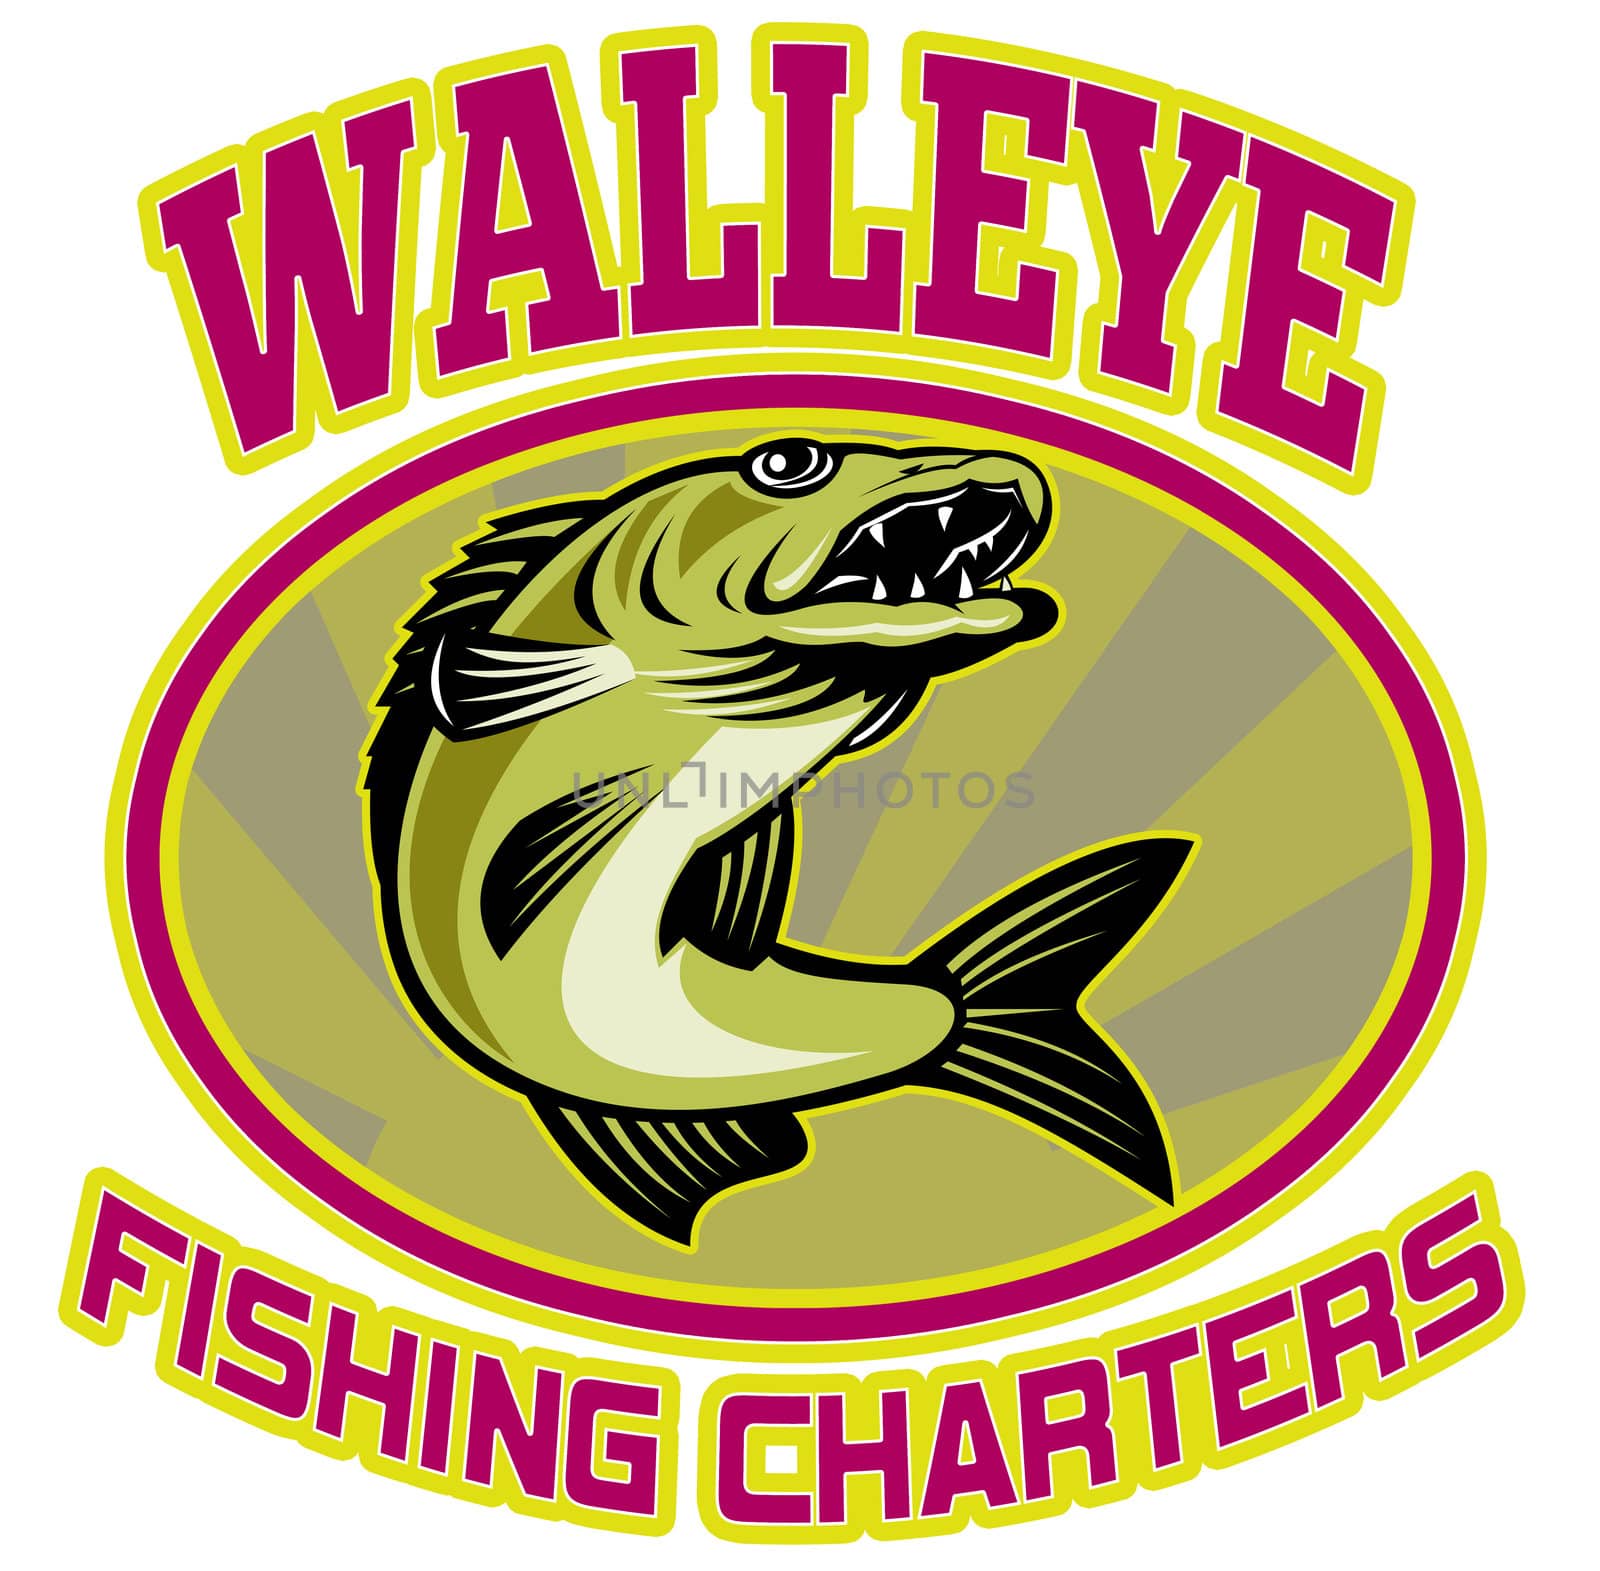 retro illustration of a walleye fish jumping set inside oval ellipse with sunburst in background  and words "walleye fishing charters"